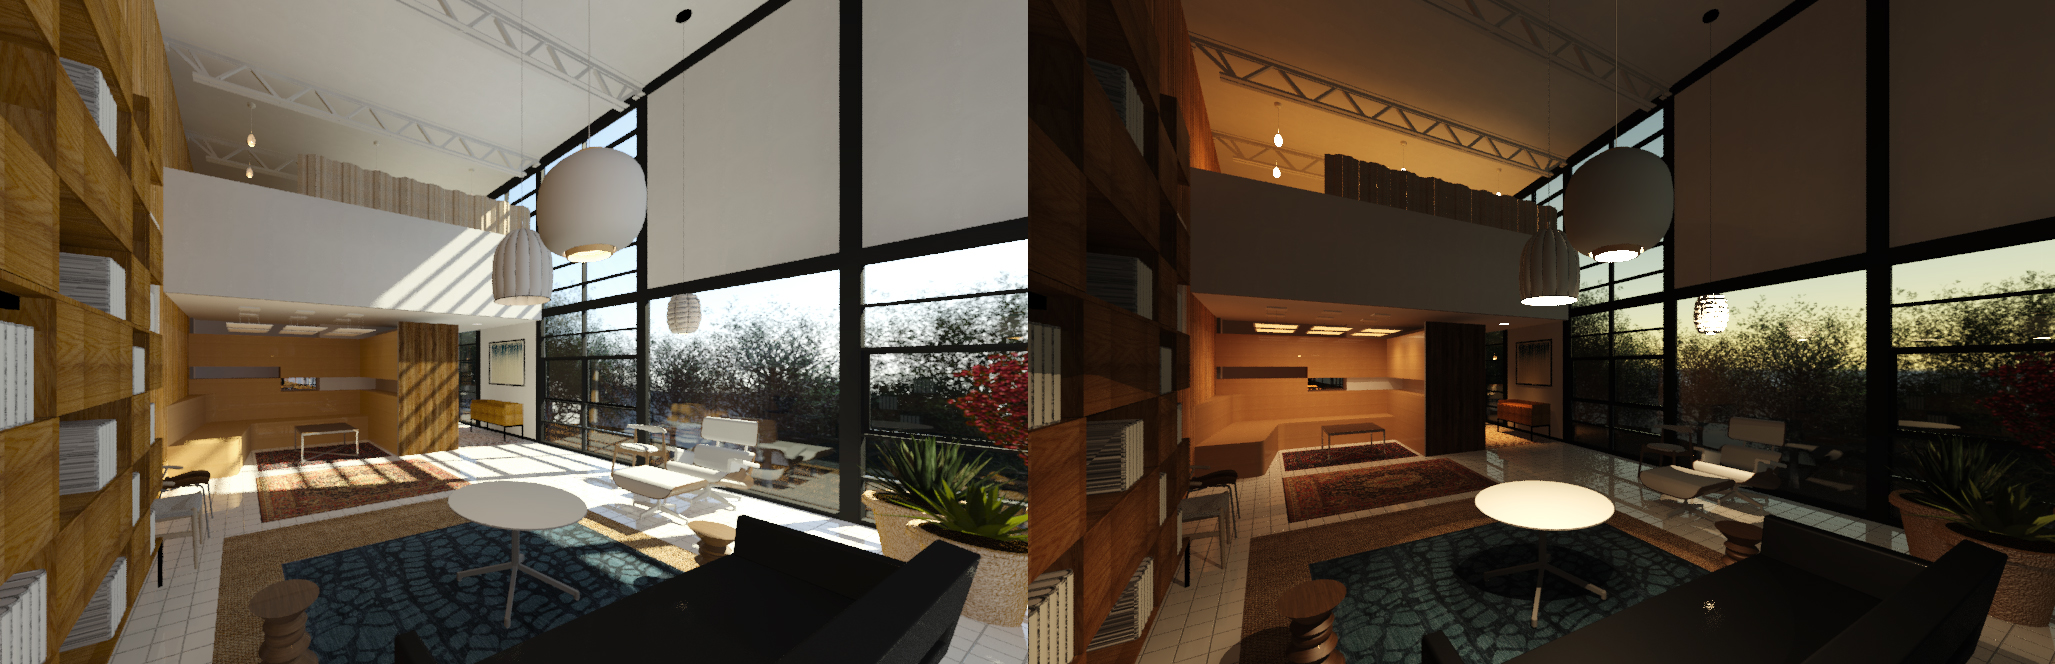 It shows the session highlight presenting the rendered daytime perspective view and the rendered nighttime perspective view. This is the expected result at the end of this lecture.